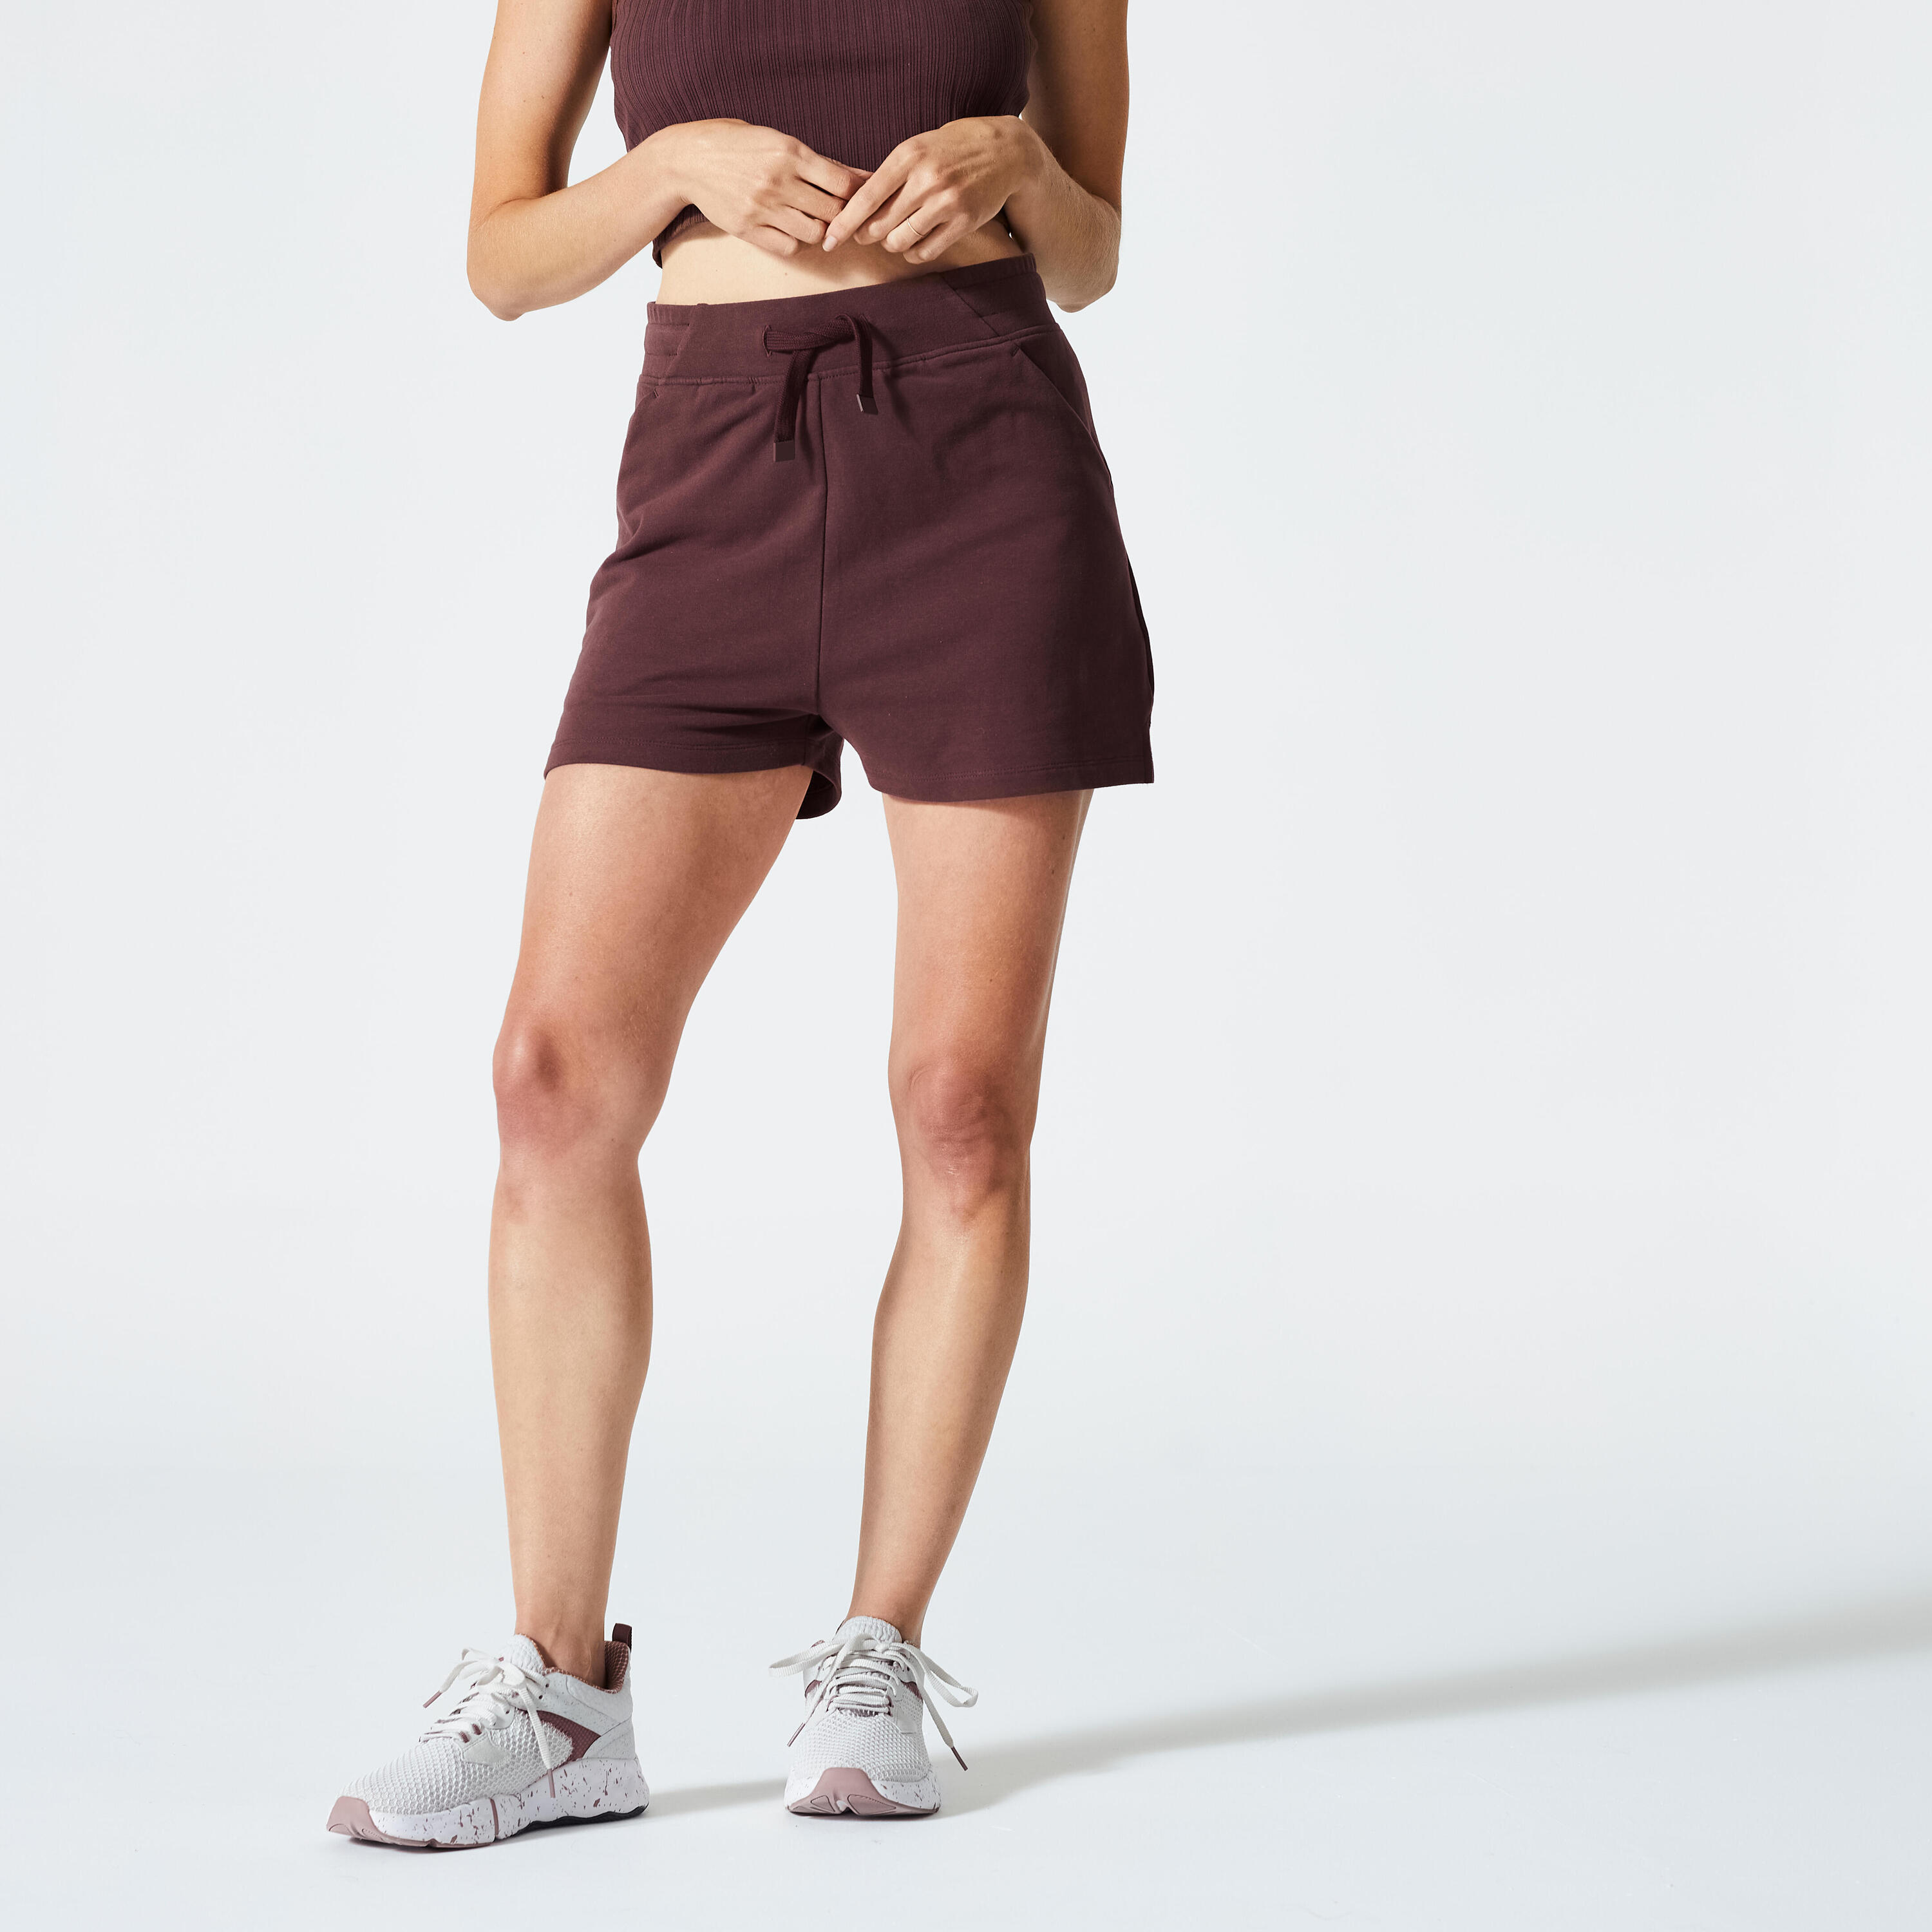 Women's Fitness Cotton Shorts 520 with Pocket - Mahogany Brown 1/5